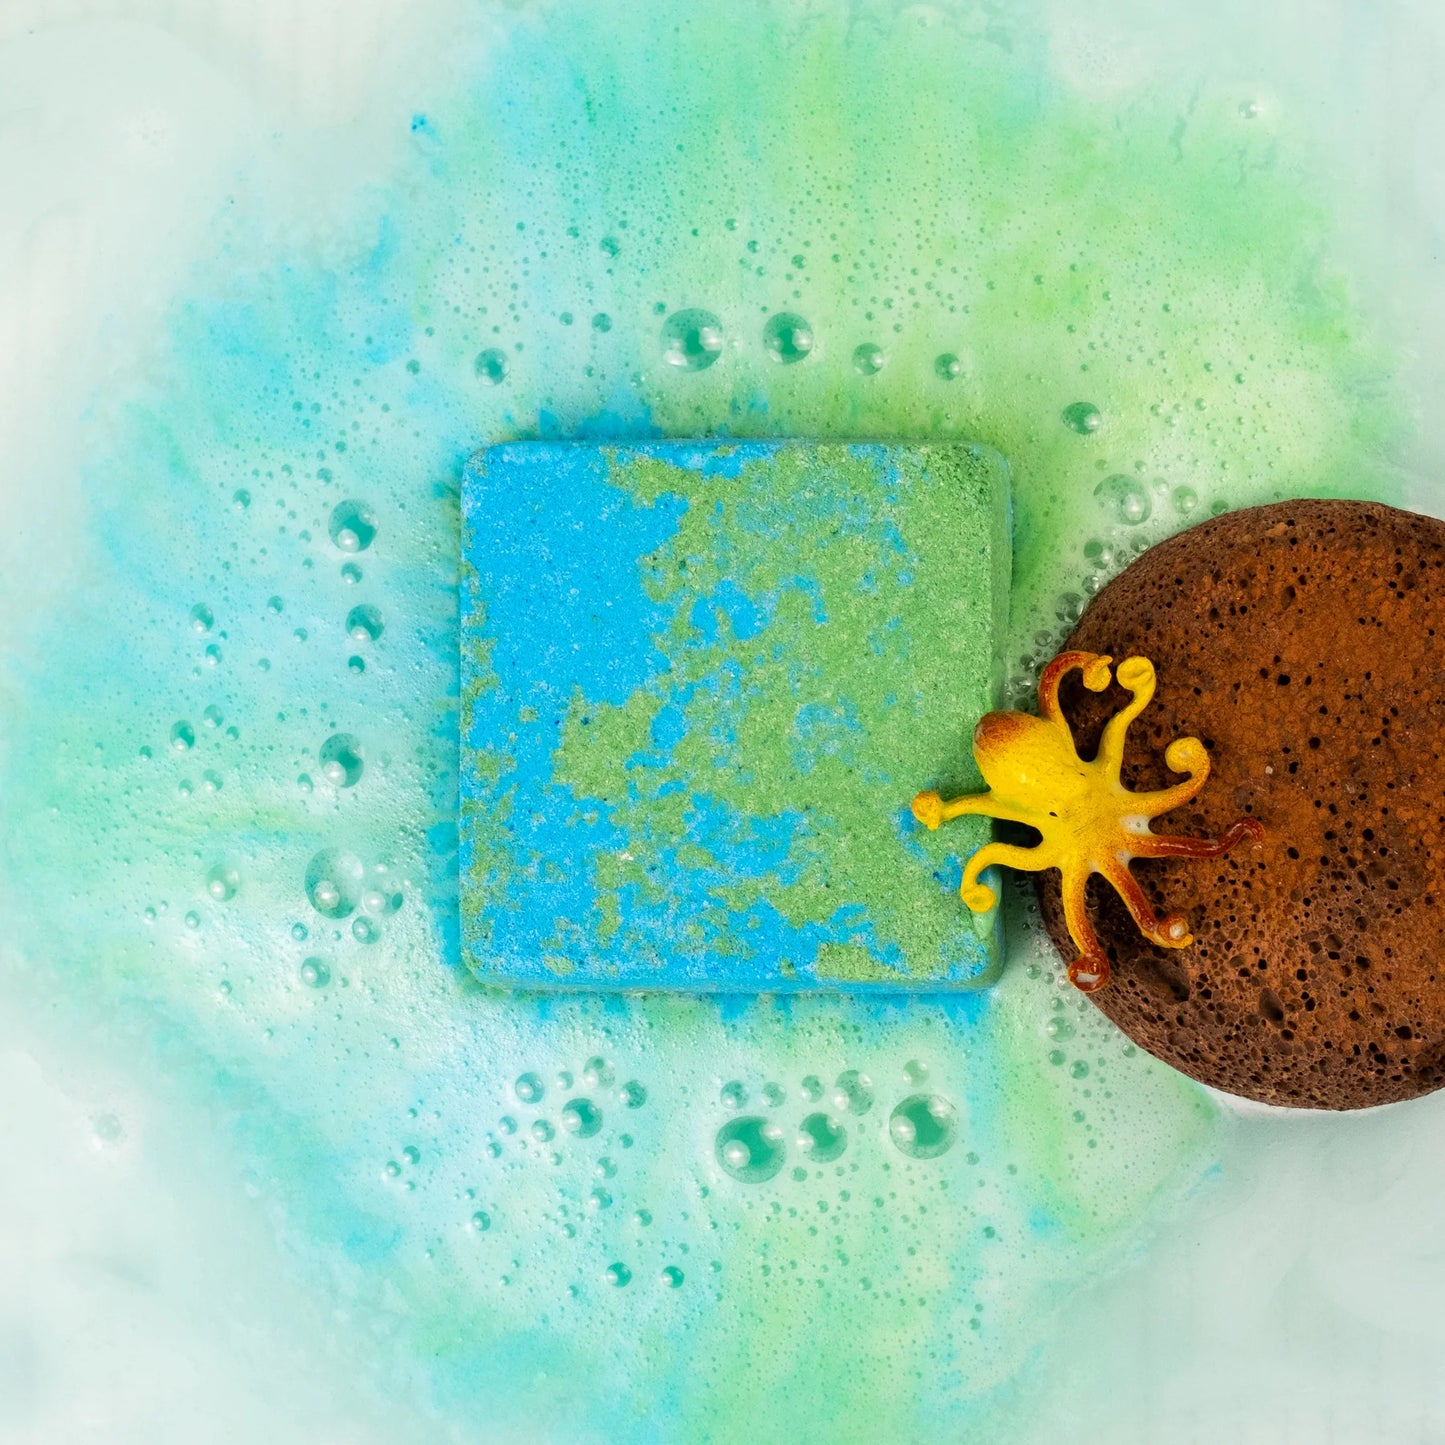 Bath bomb with Toy Ocean creature